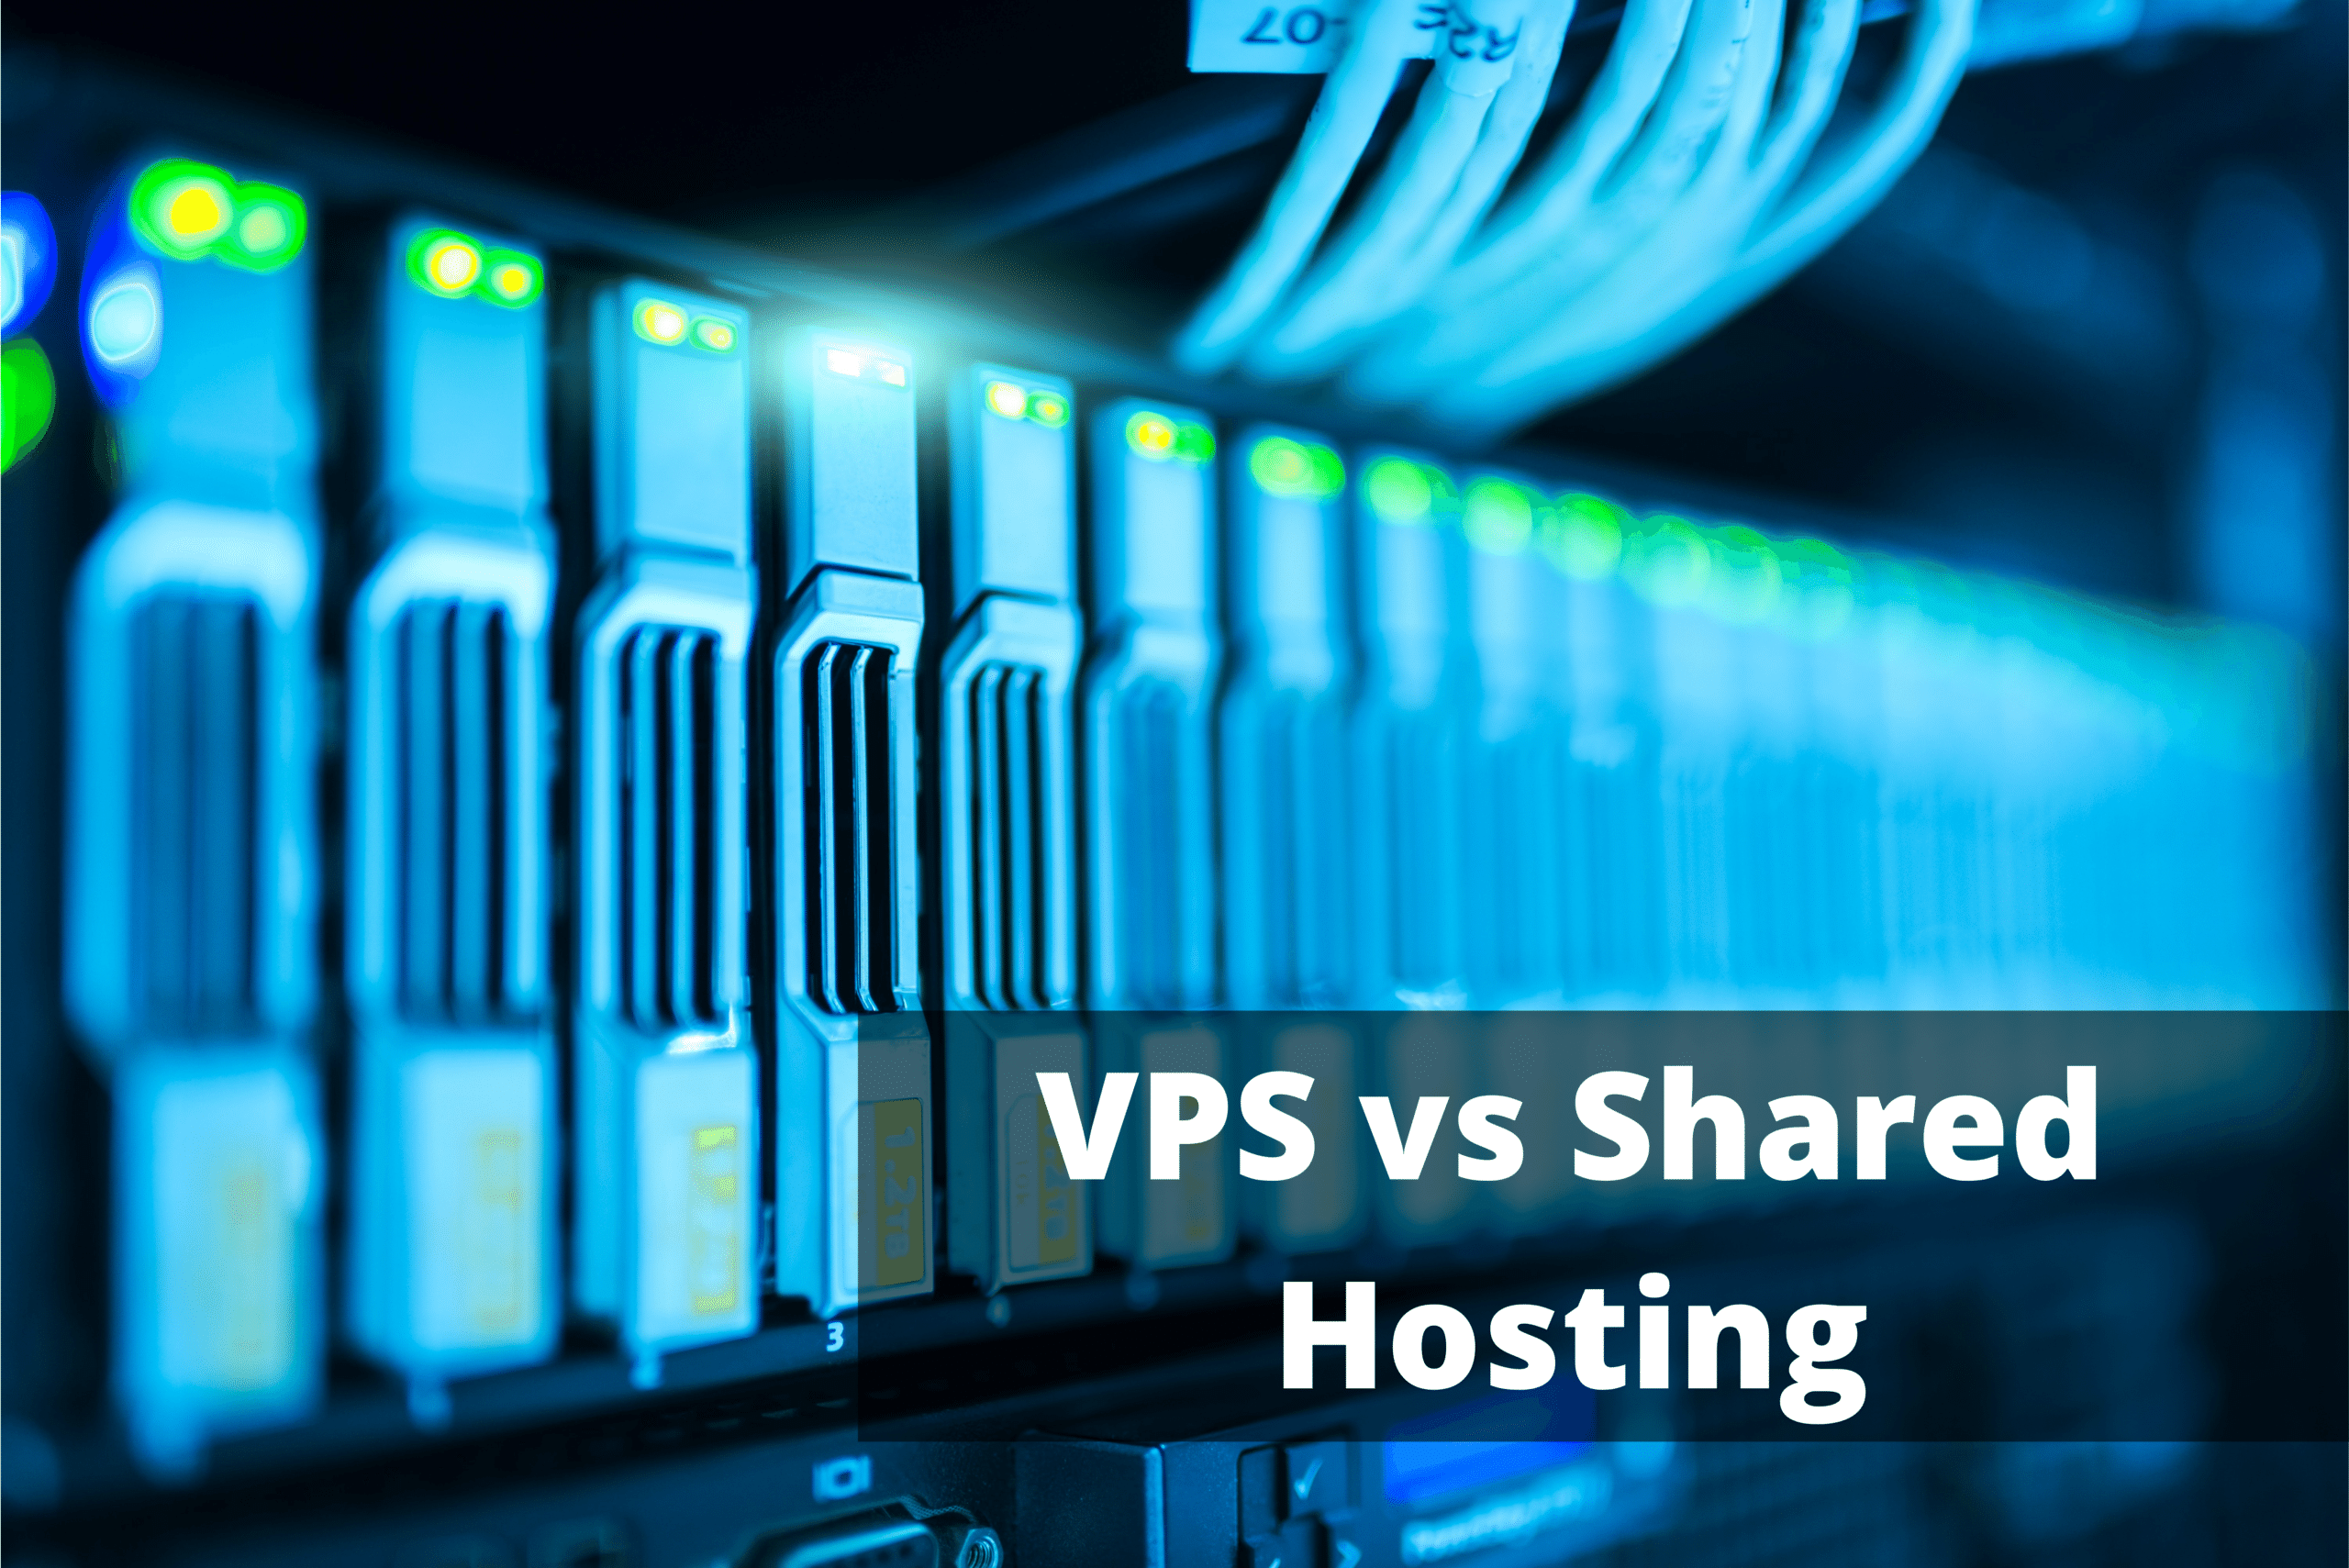 You are currently viewing VPS vs Shared Hosting [Which is Better?]